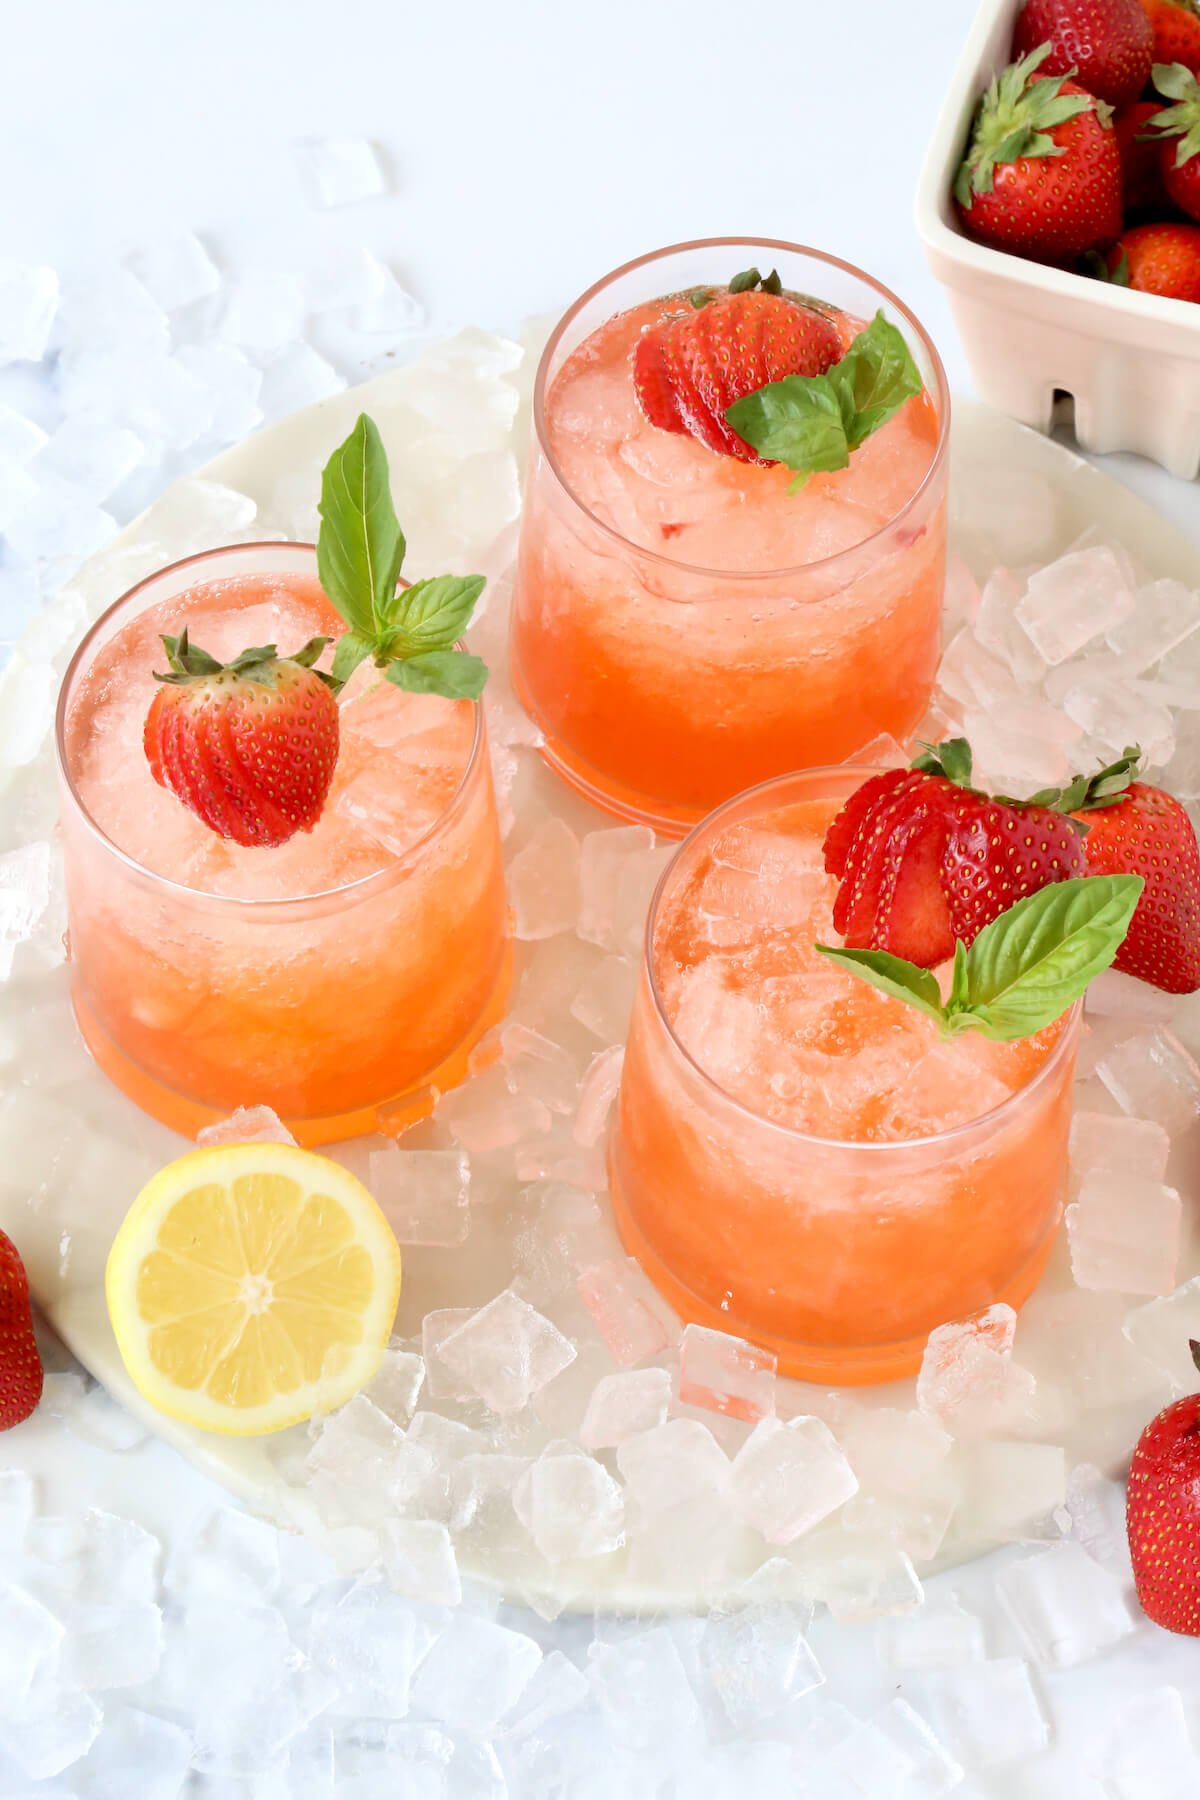 A glass filled with a red liquid and a fresh strawberry and a mint leaf surrounded by ice and a lemon slice.  